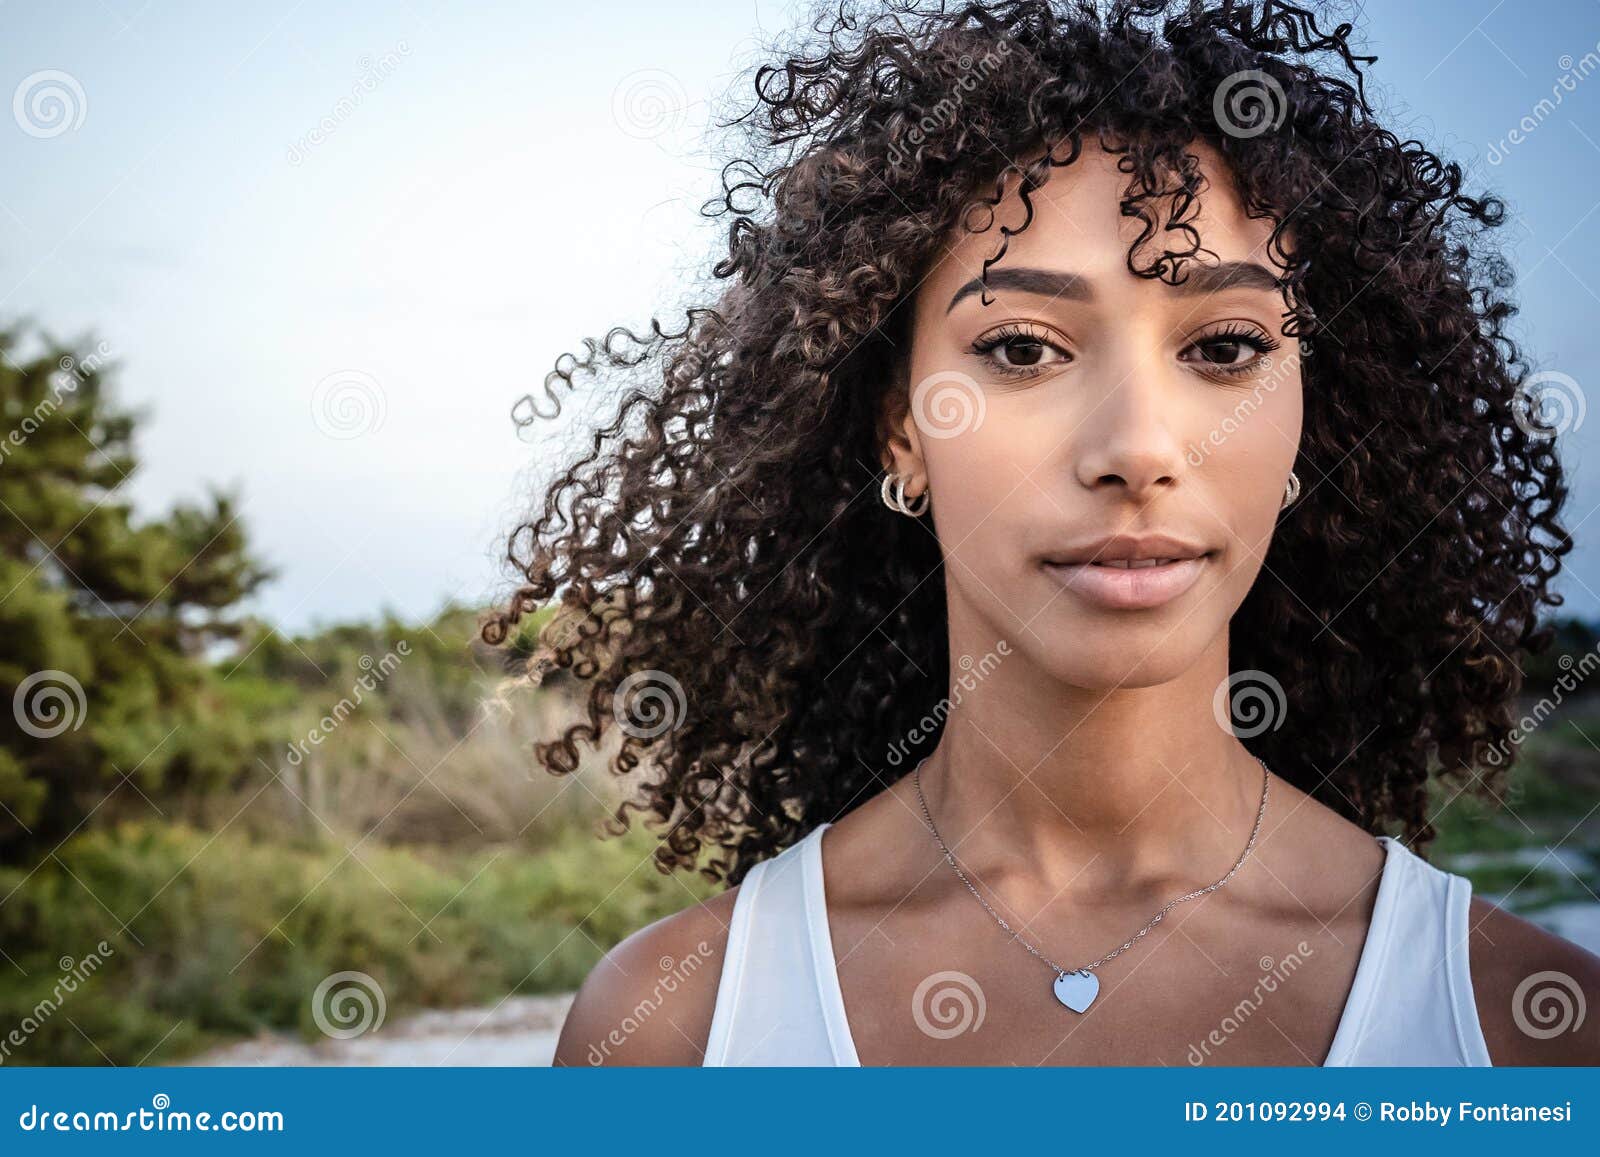 Femininity and Beauty in Nature: Close Up Portrait of Beautiful Black  Hispanic Young Woman with Curly Dark Long Hair Looking Stock Photo - Image  of artist, face: 201092994